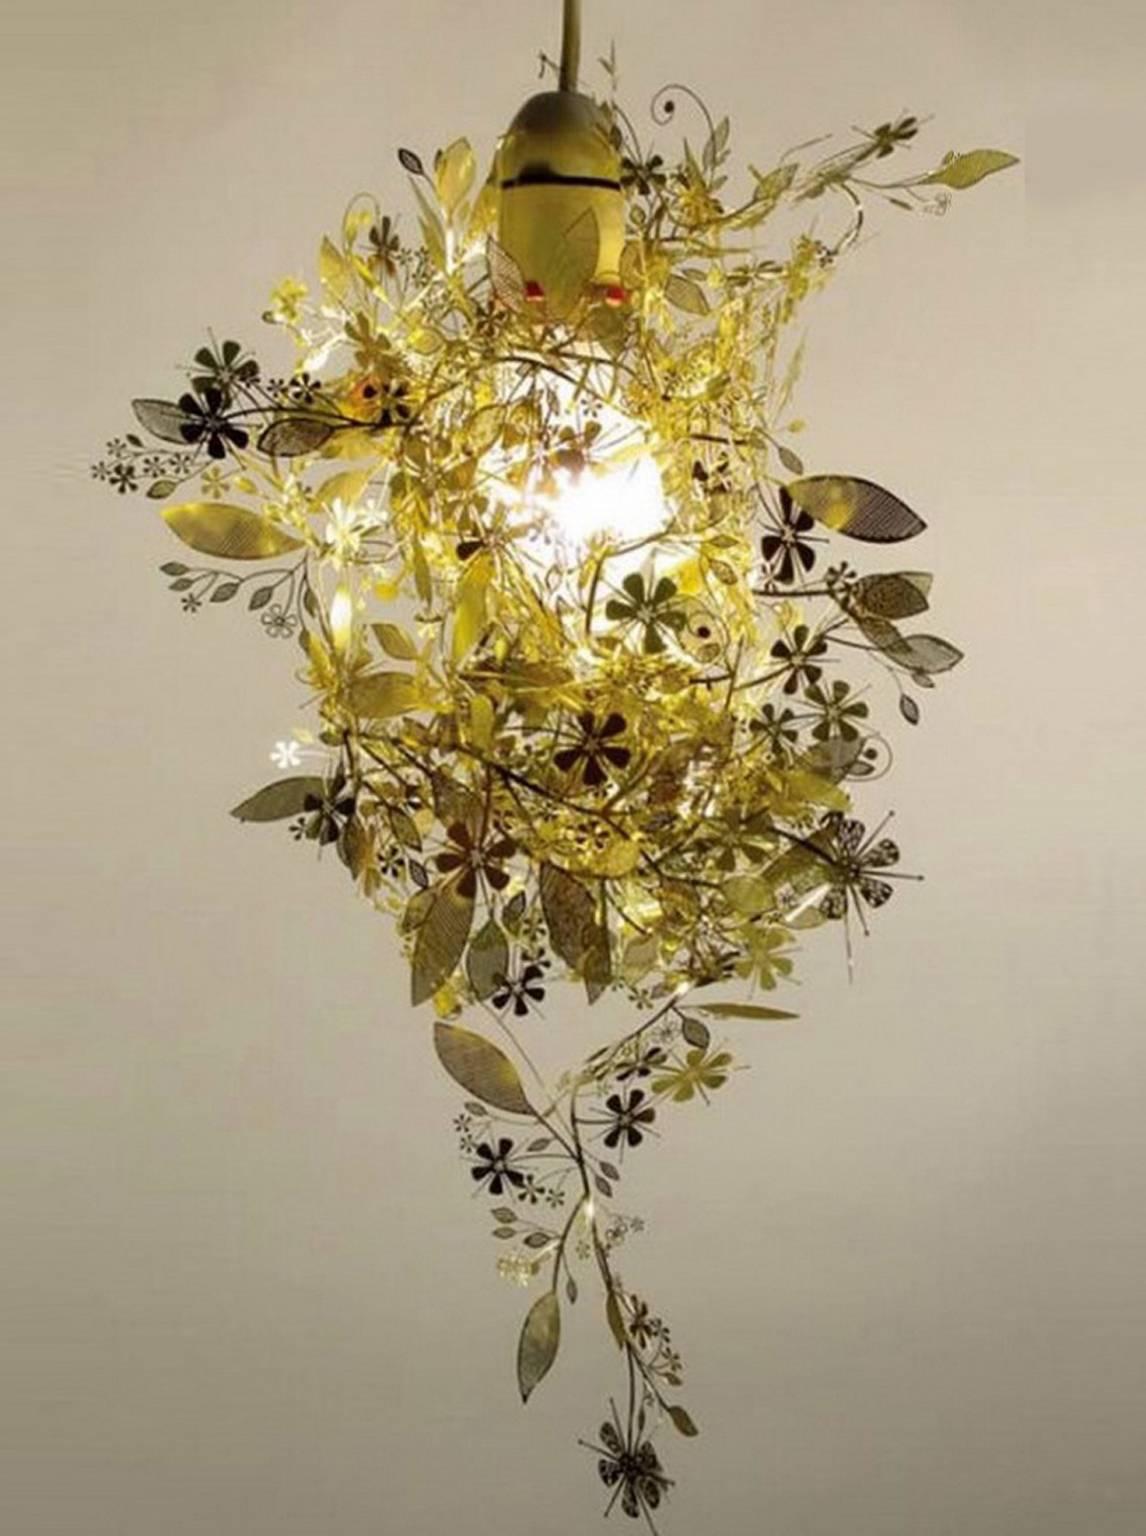 The Garland light is a long metal garland of flowers that can be wrapped around a light bulb. Garland is part of Major Museum collections like 1, Guggenheim to name a few.

Etched metal


